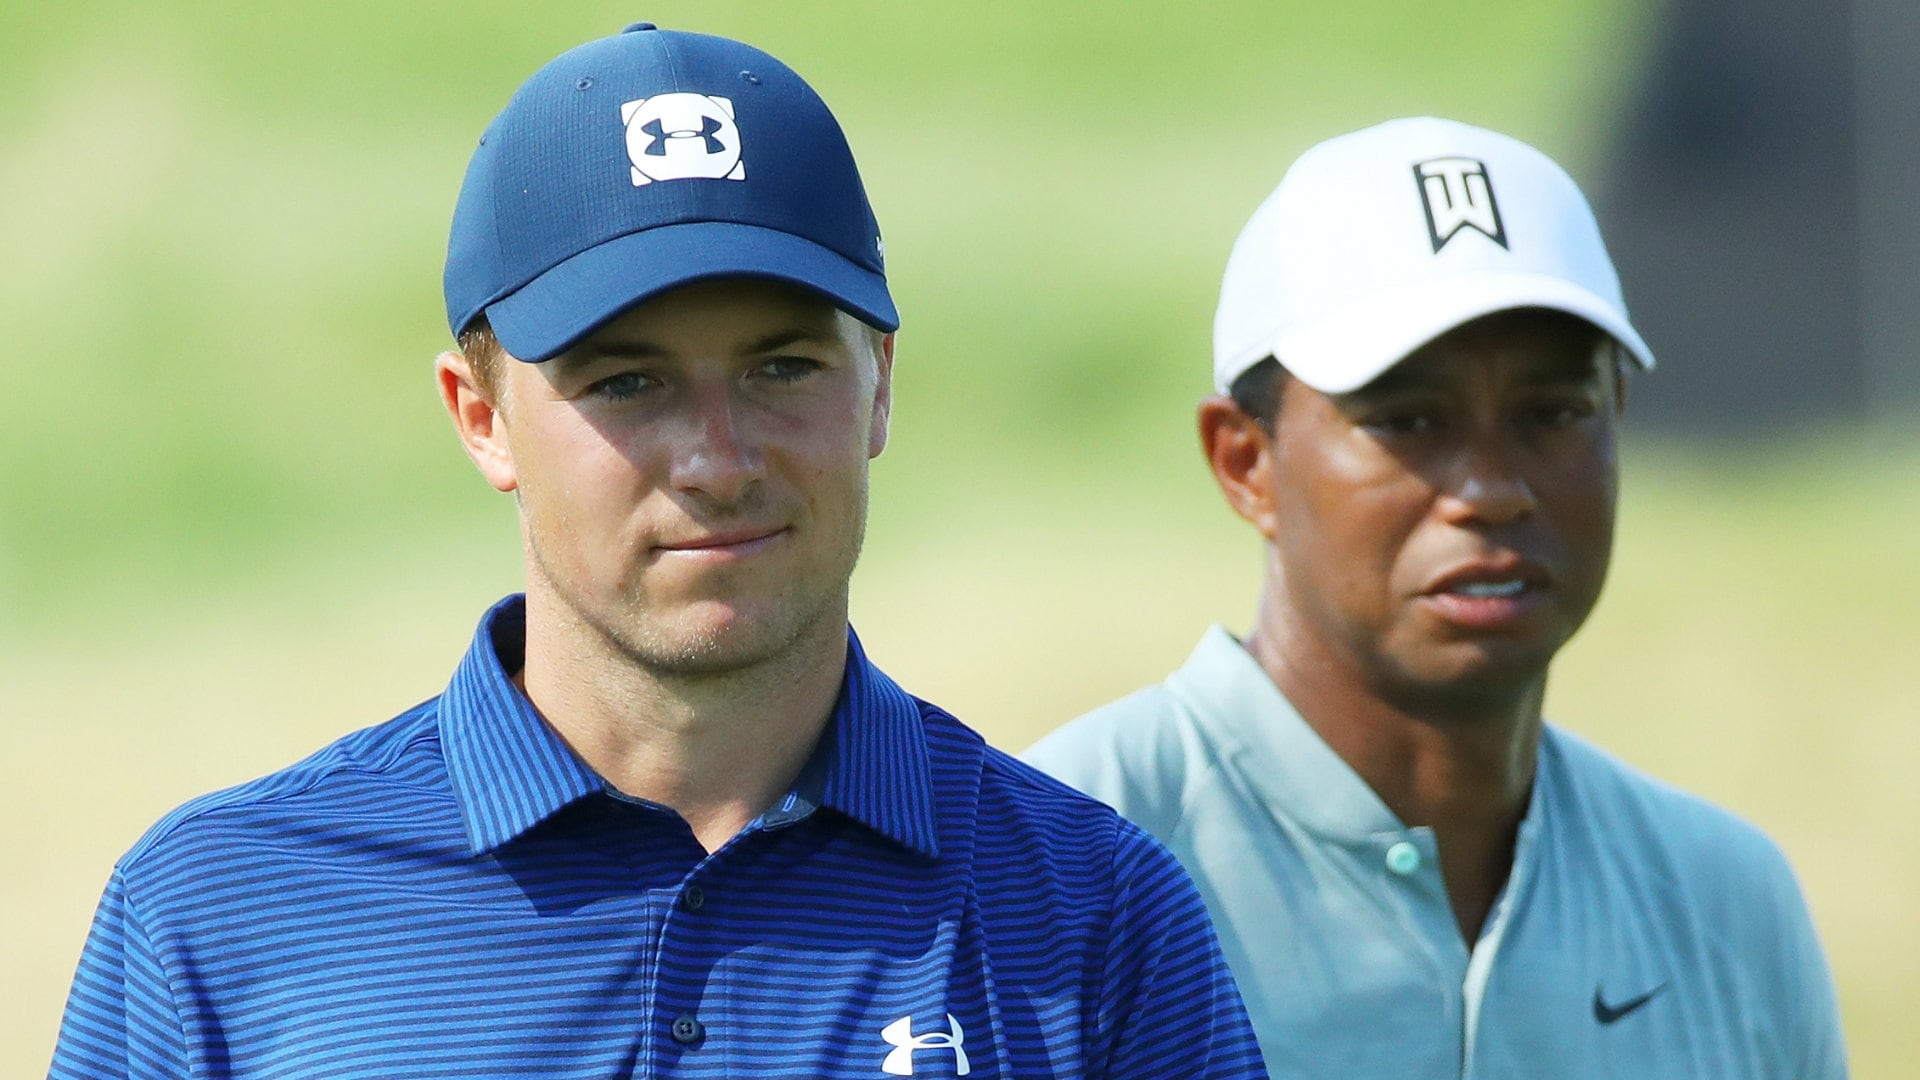 Jordan Spieth excited for 2022 PGA Championship pairing with Tiger Woods, Rory McIlroy